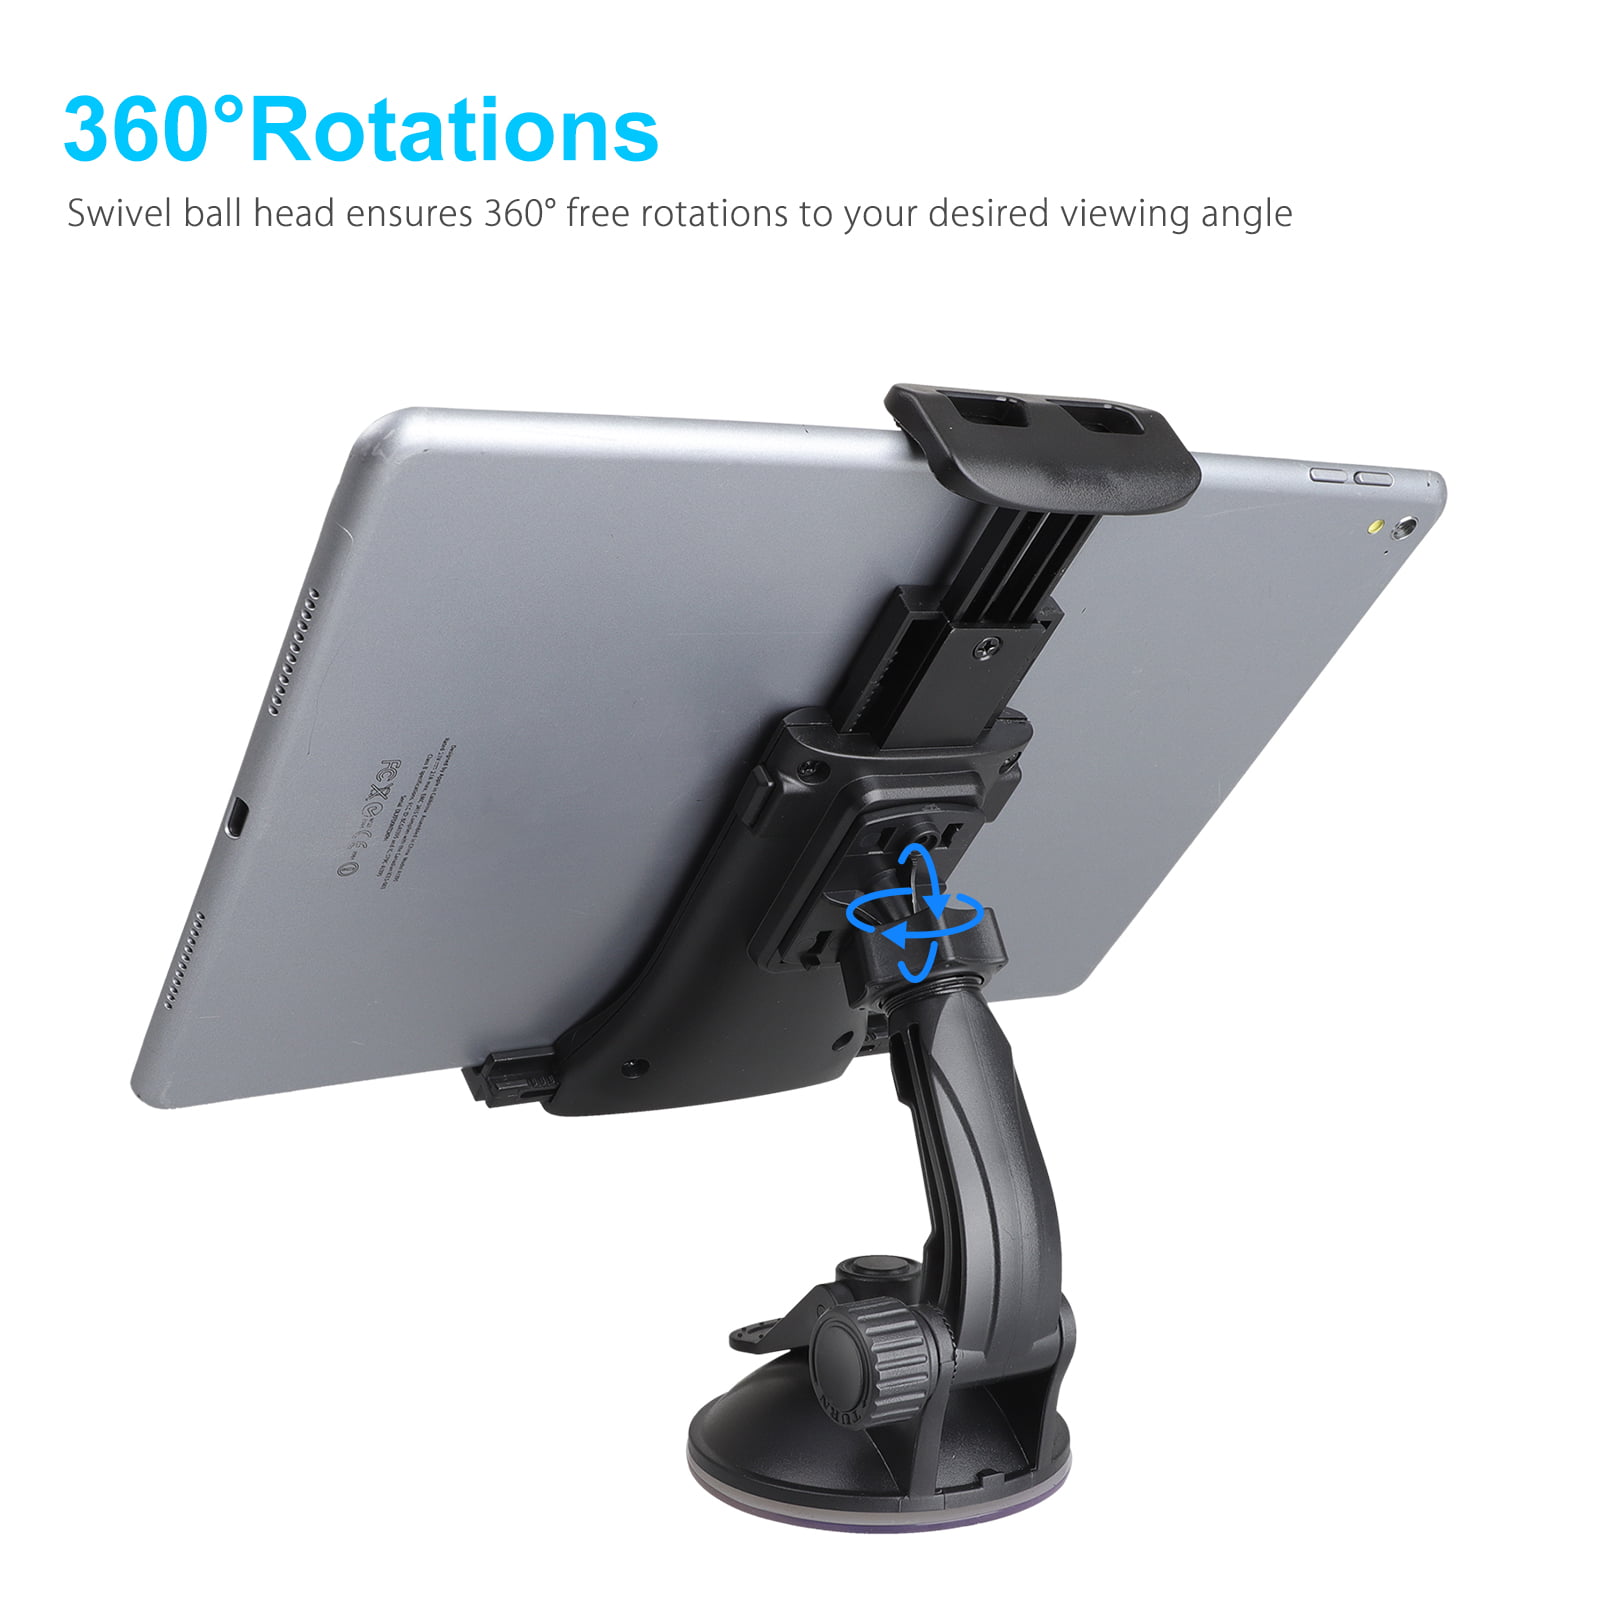 Car Tablet Mount, TSV Tablet Holder for Windshield Dashboard, 360 Rotating  Universal Suction Cup Bracket Fit for iPhone, iPad Mini Air, Samsung Galaxy